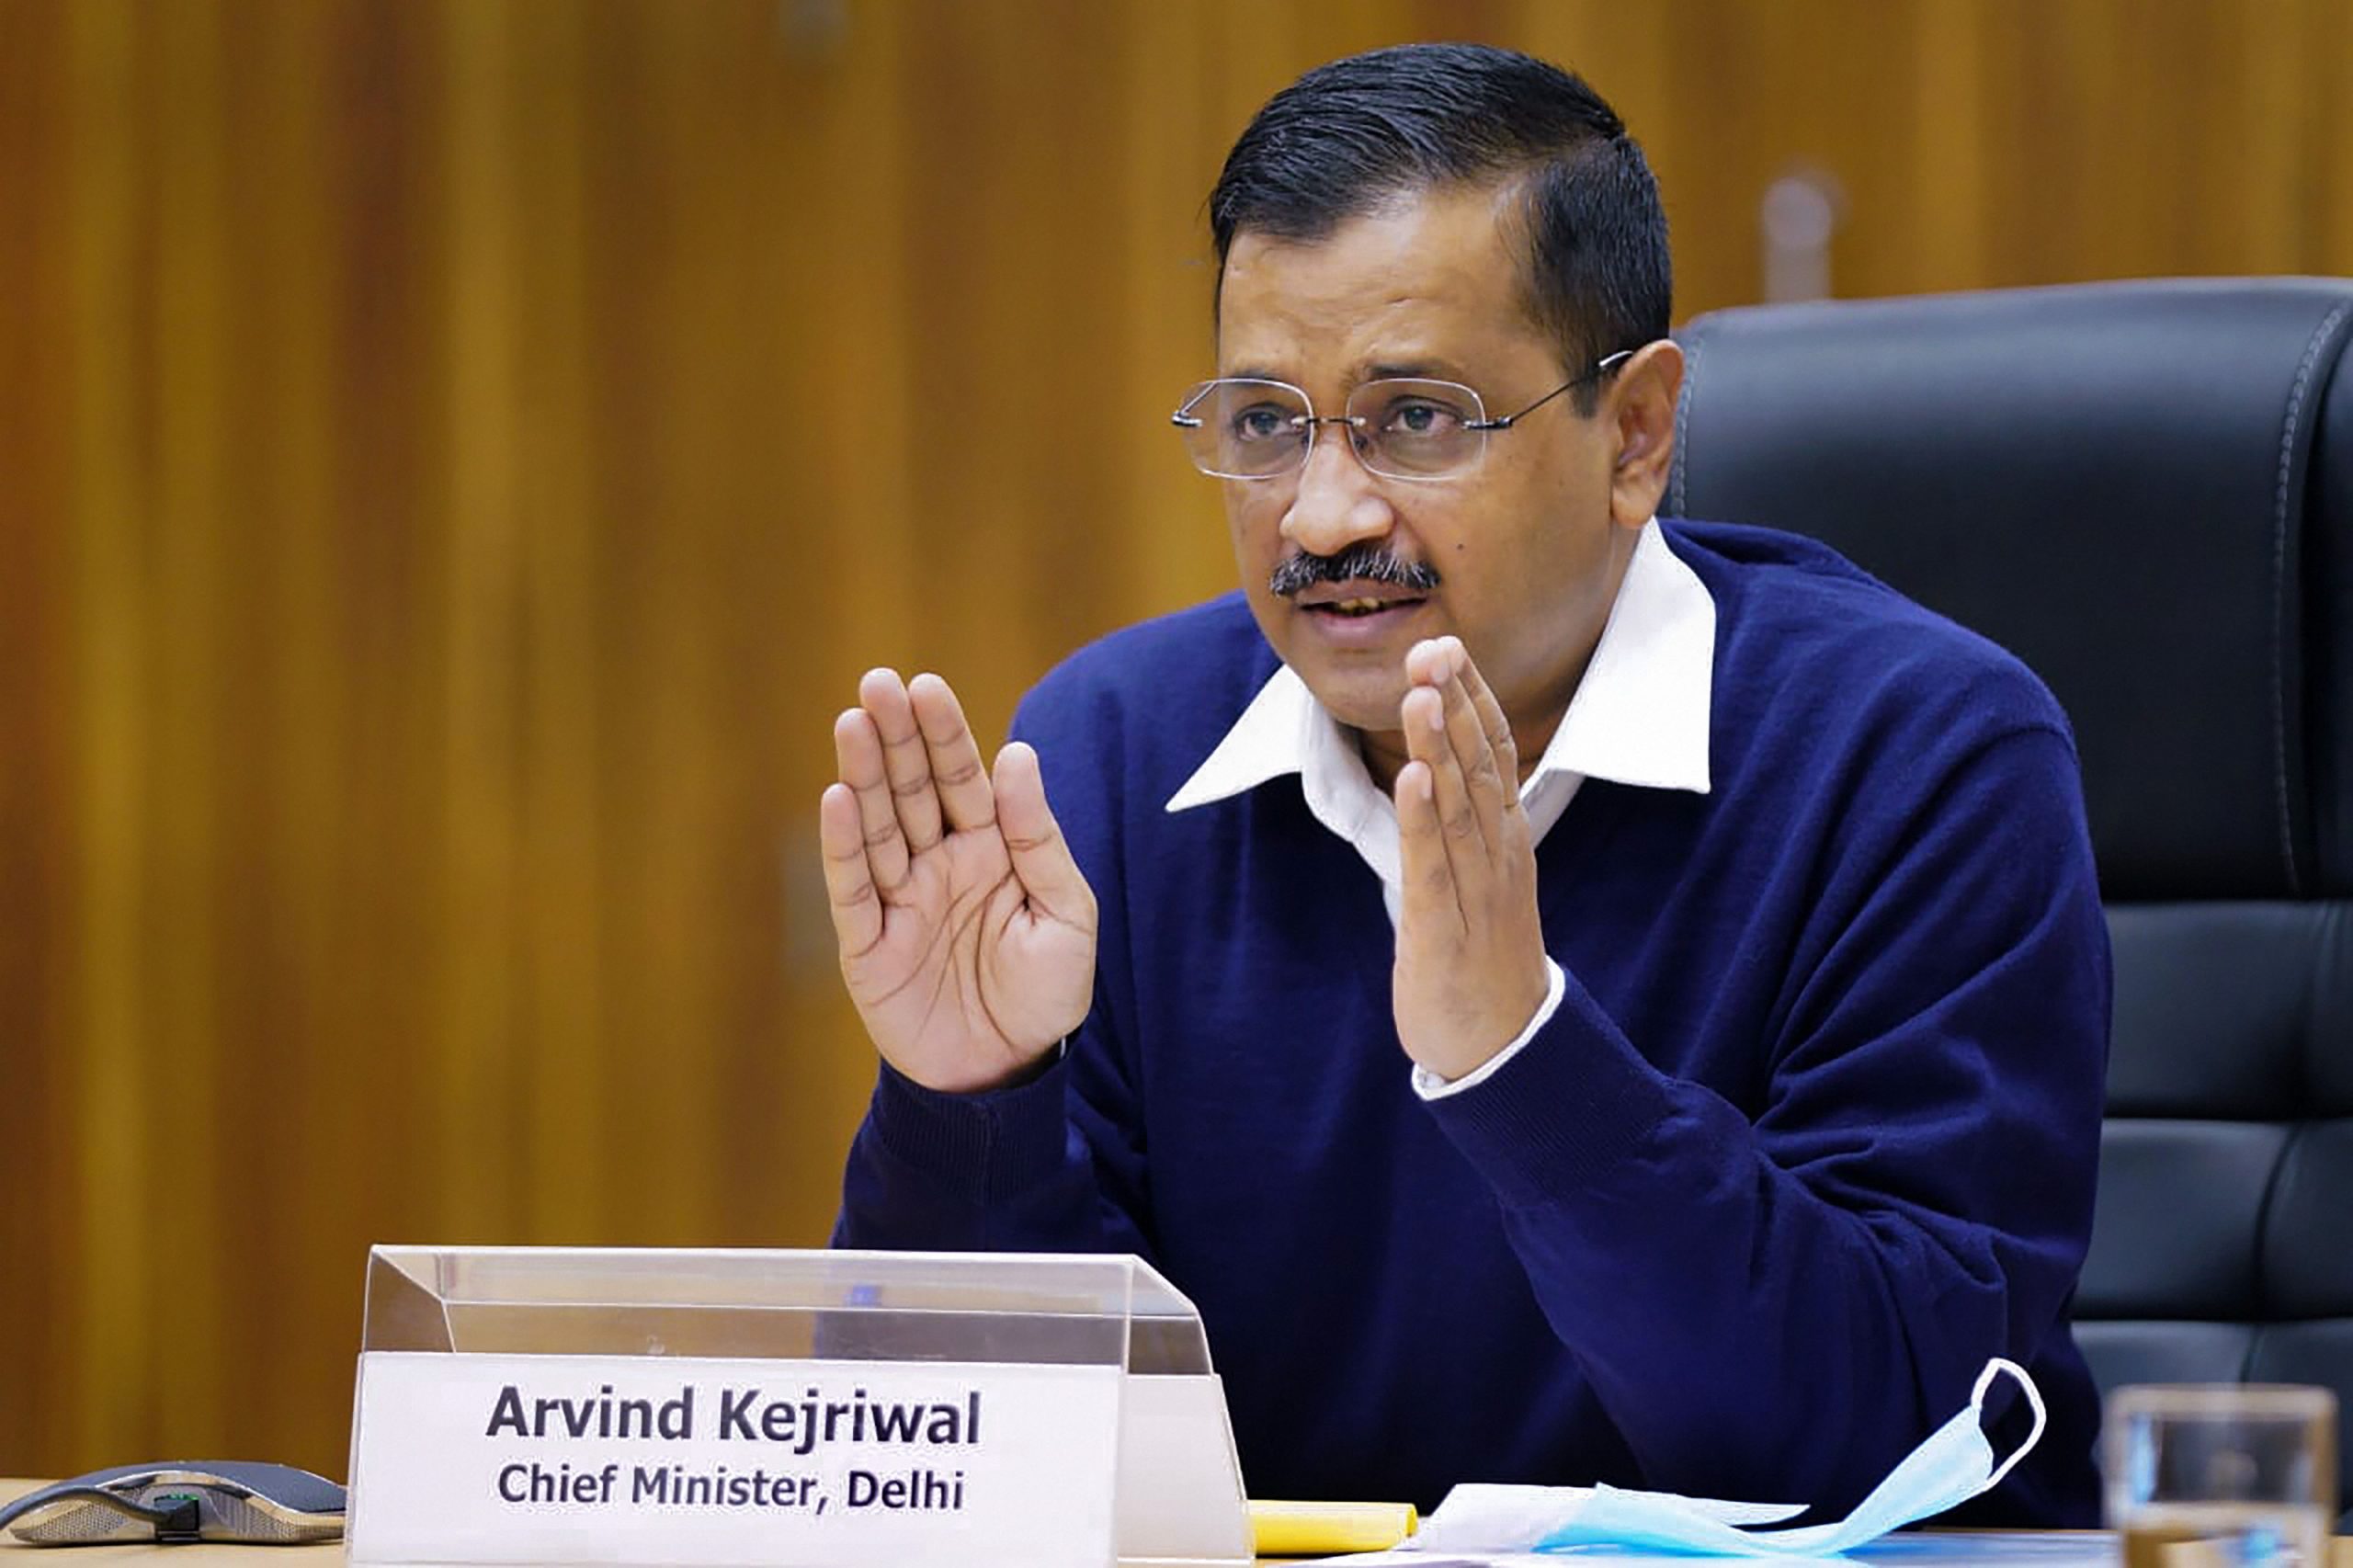 If not stopped, would have supported farmers in strike, says Arvind Kejriwal